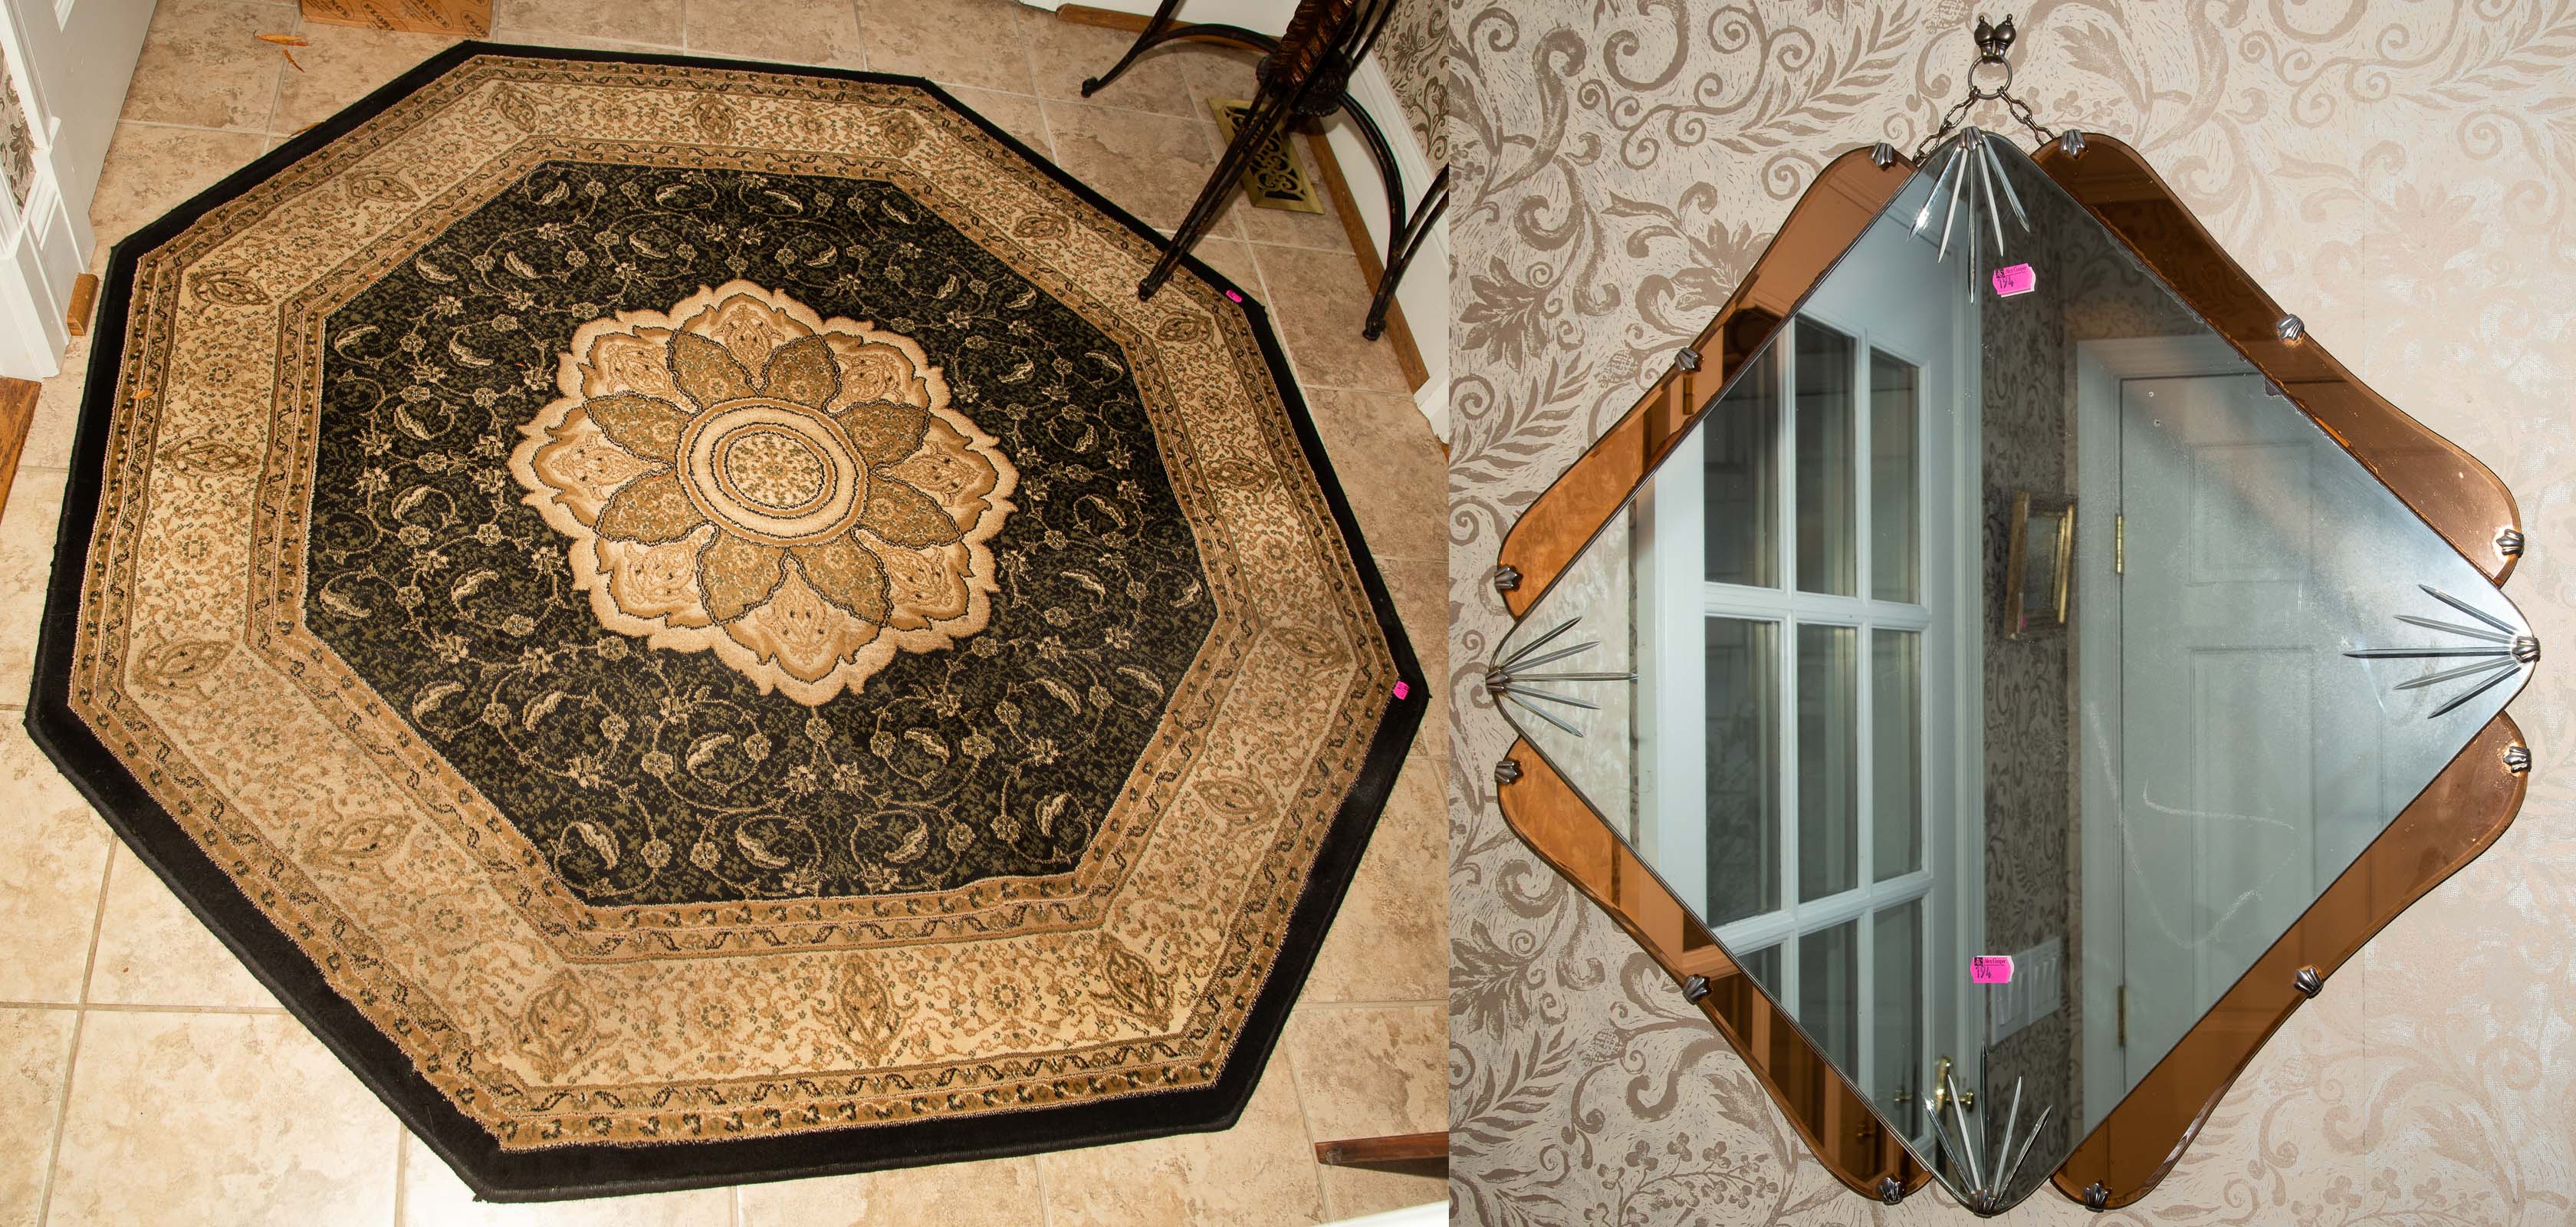 AN ETCHED MIRROR & OCTAGONAL RUG